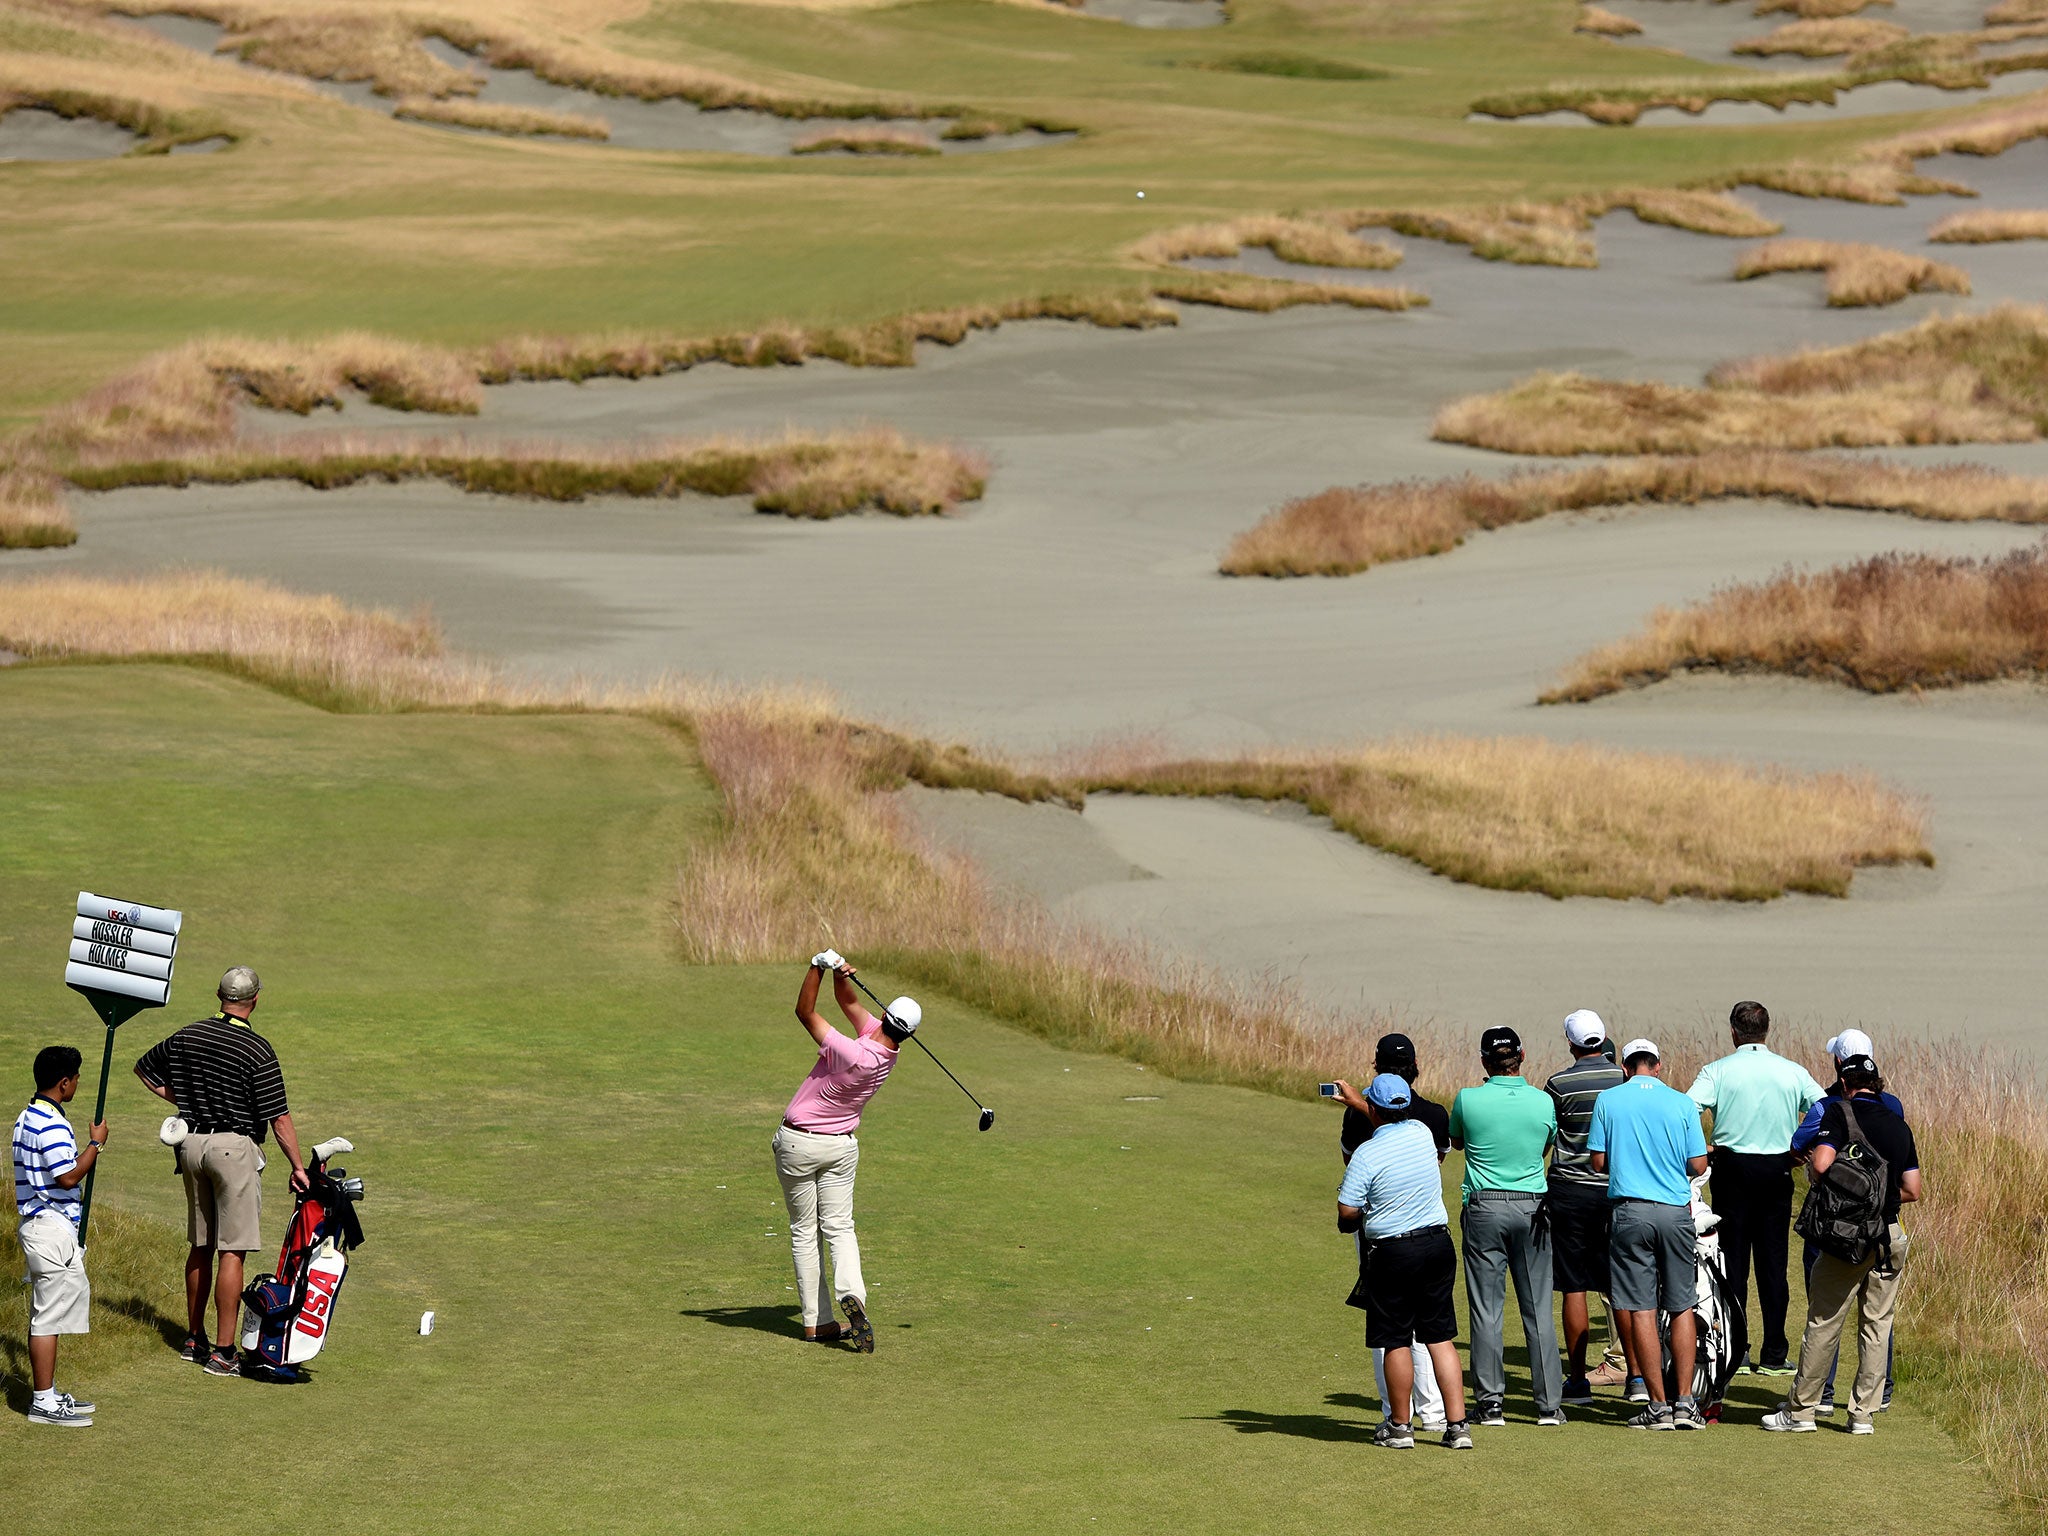 The Chambers Bay golf course has been criticised by some golfers